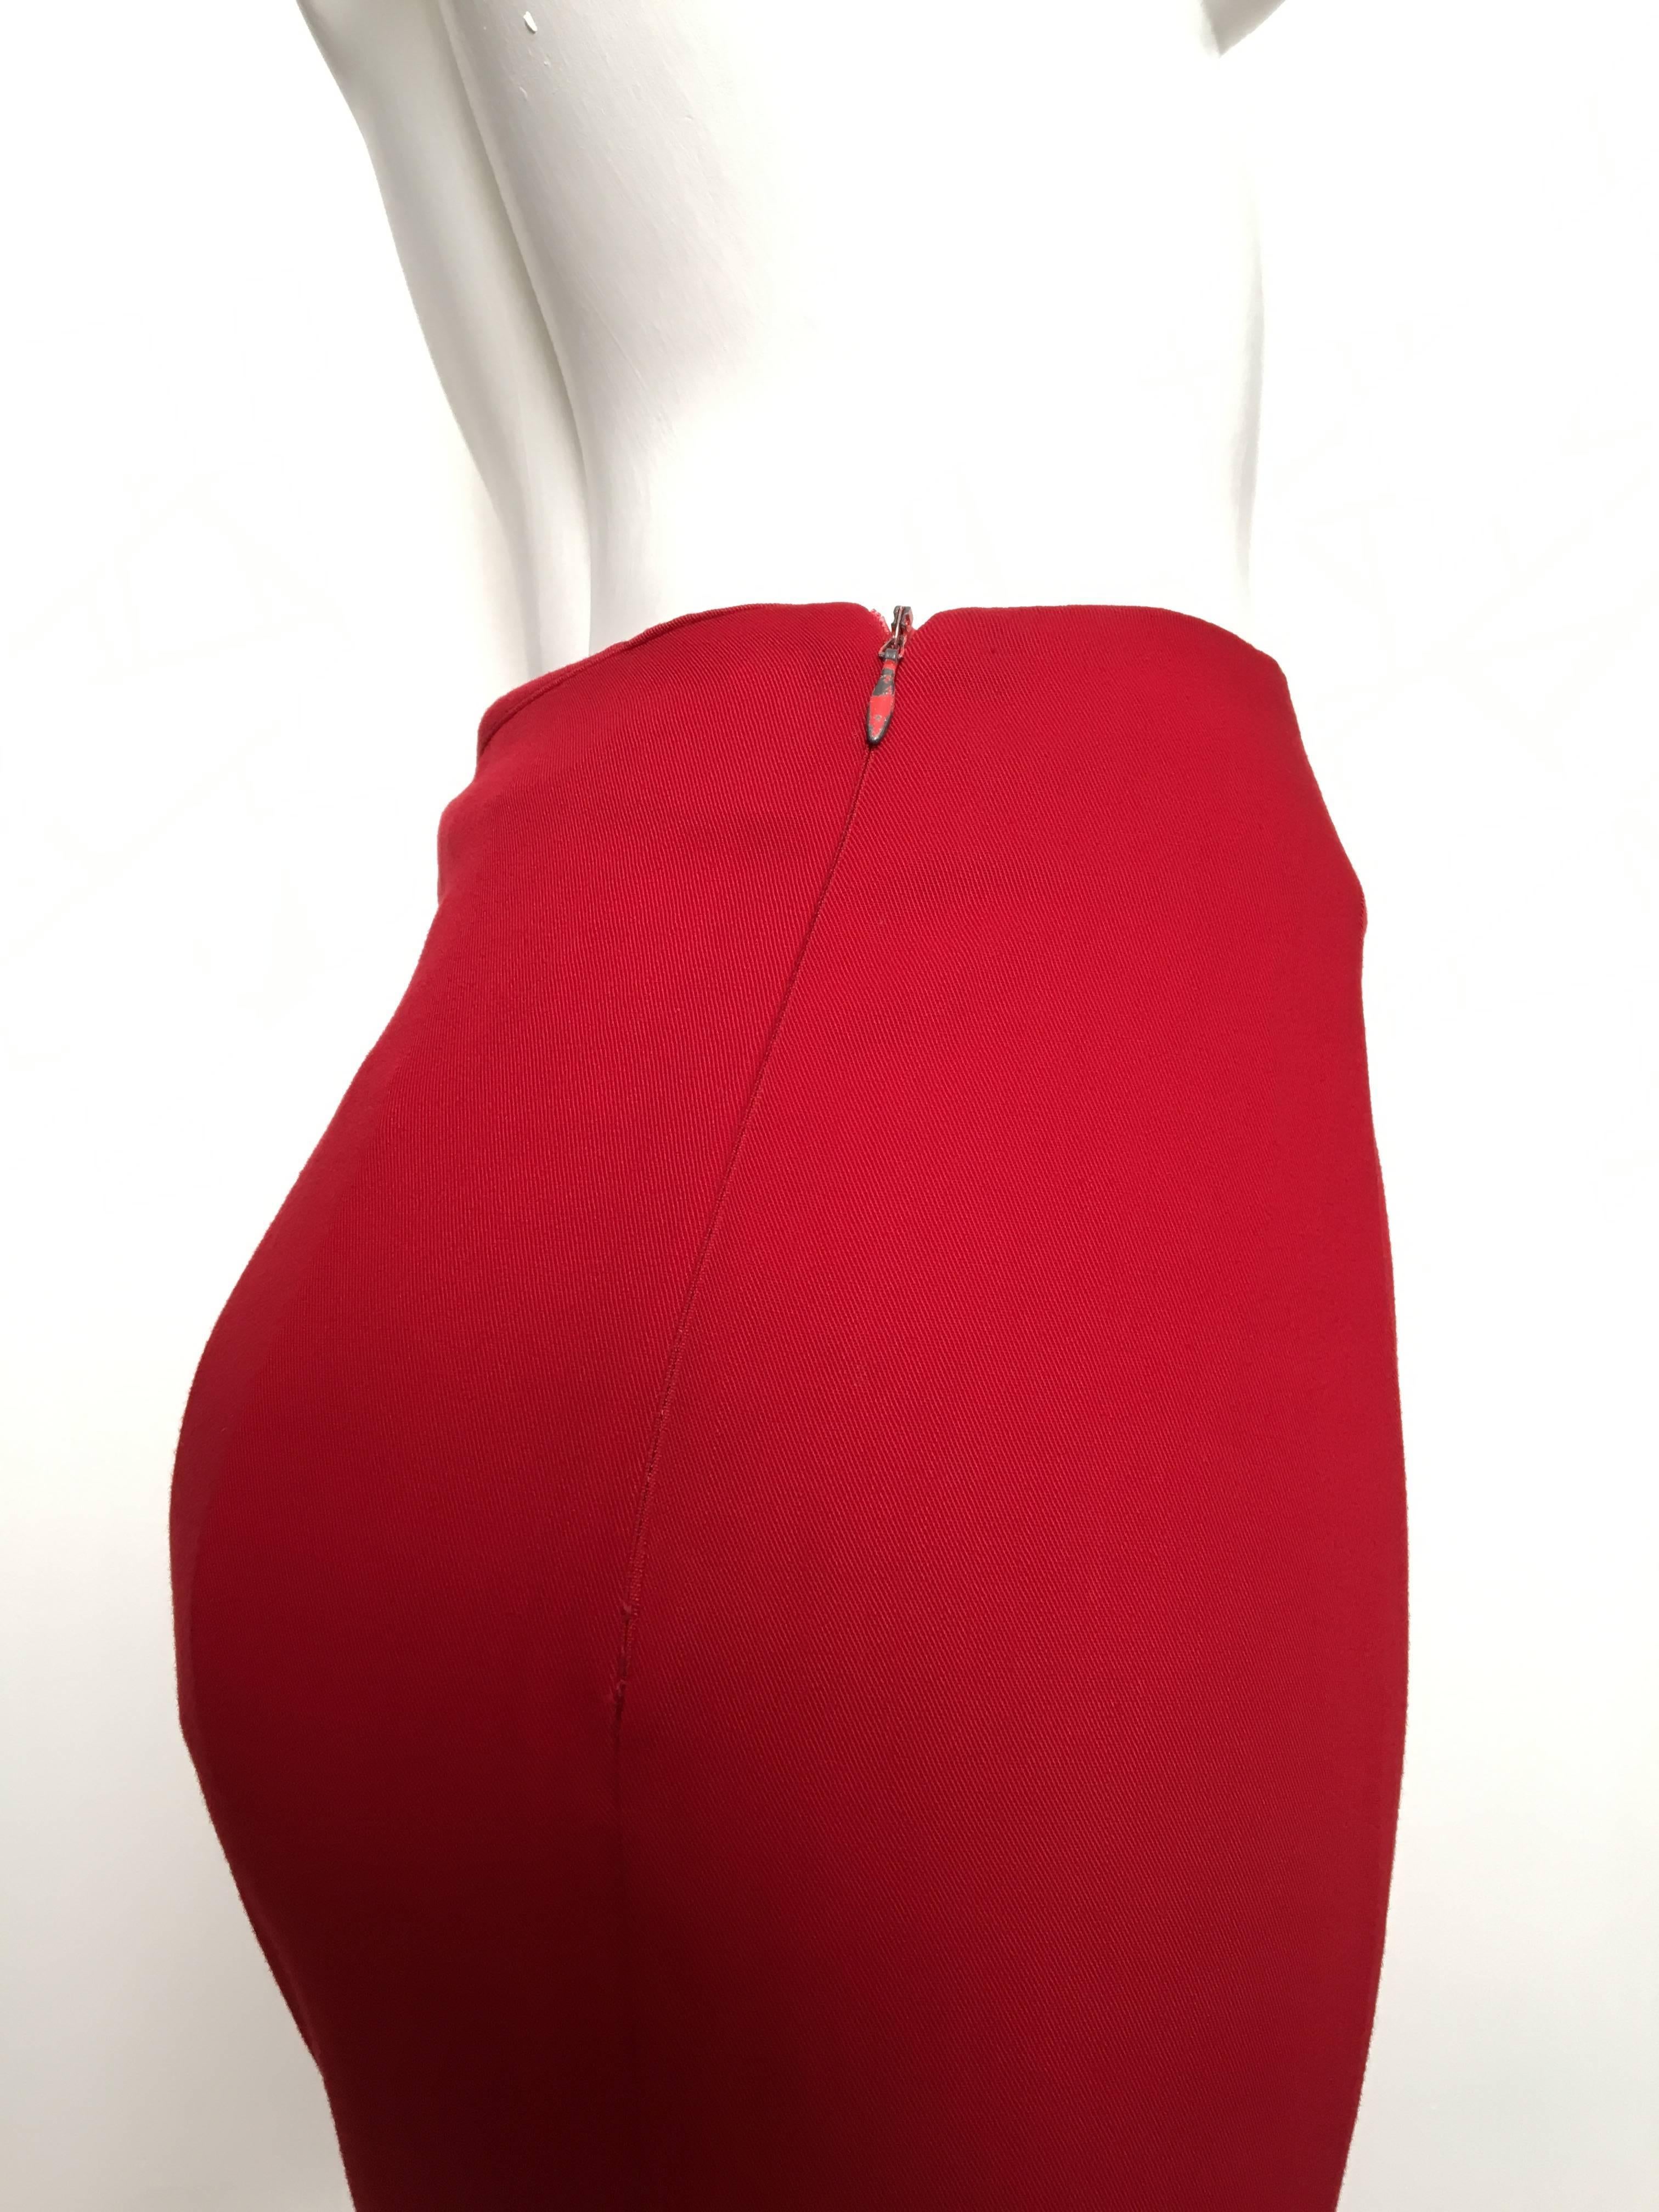 Women's or Men's Norma Kamali Red Cotton Long Pleated Skirt Size 4. For Sale